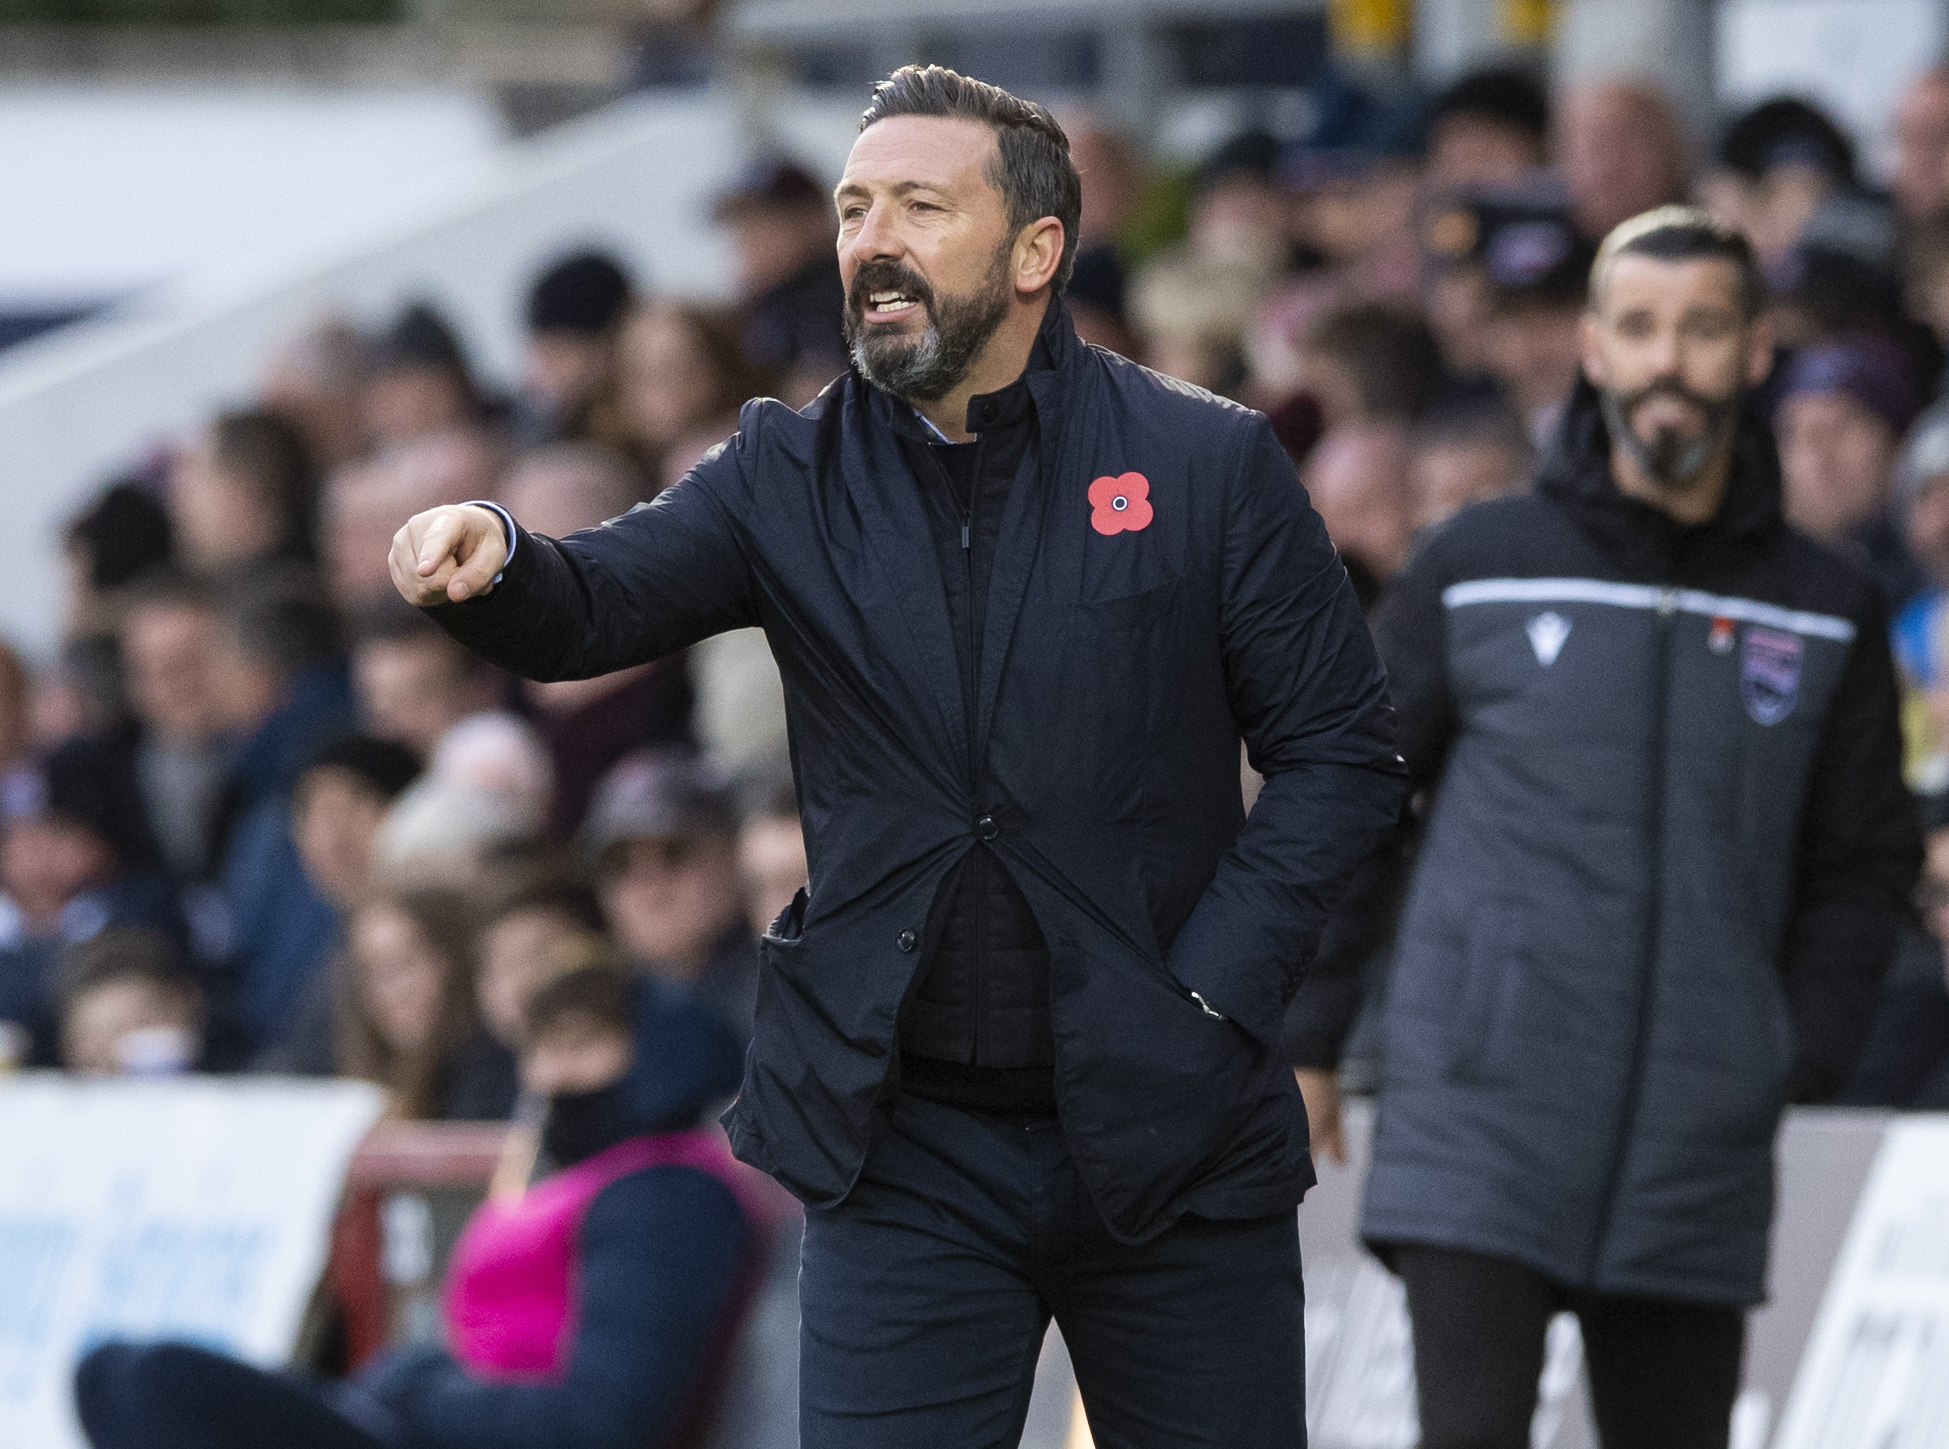 Aberdeen manager Derek McInnes pictured during the Ladbrokes Premiership match between Ross County and Aberdeen at the Global Energy Stadium, on November 9, 2019, in Dingwall, Scotland.